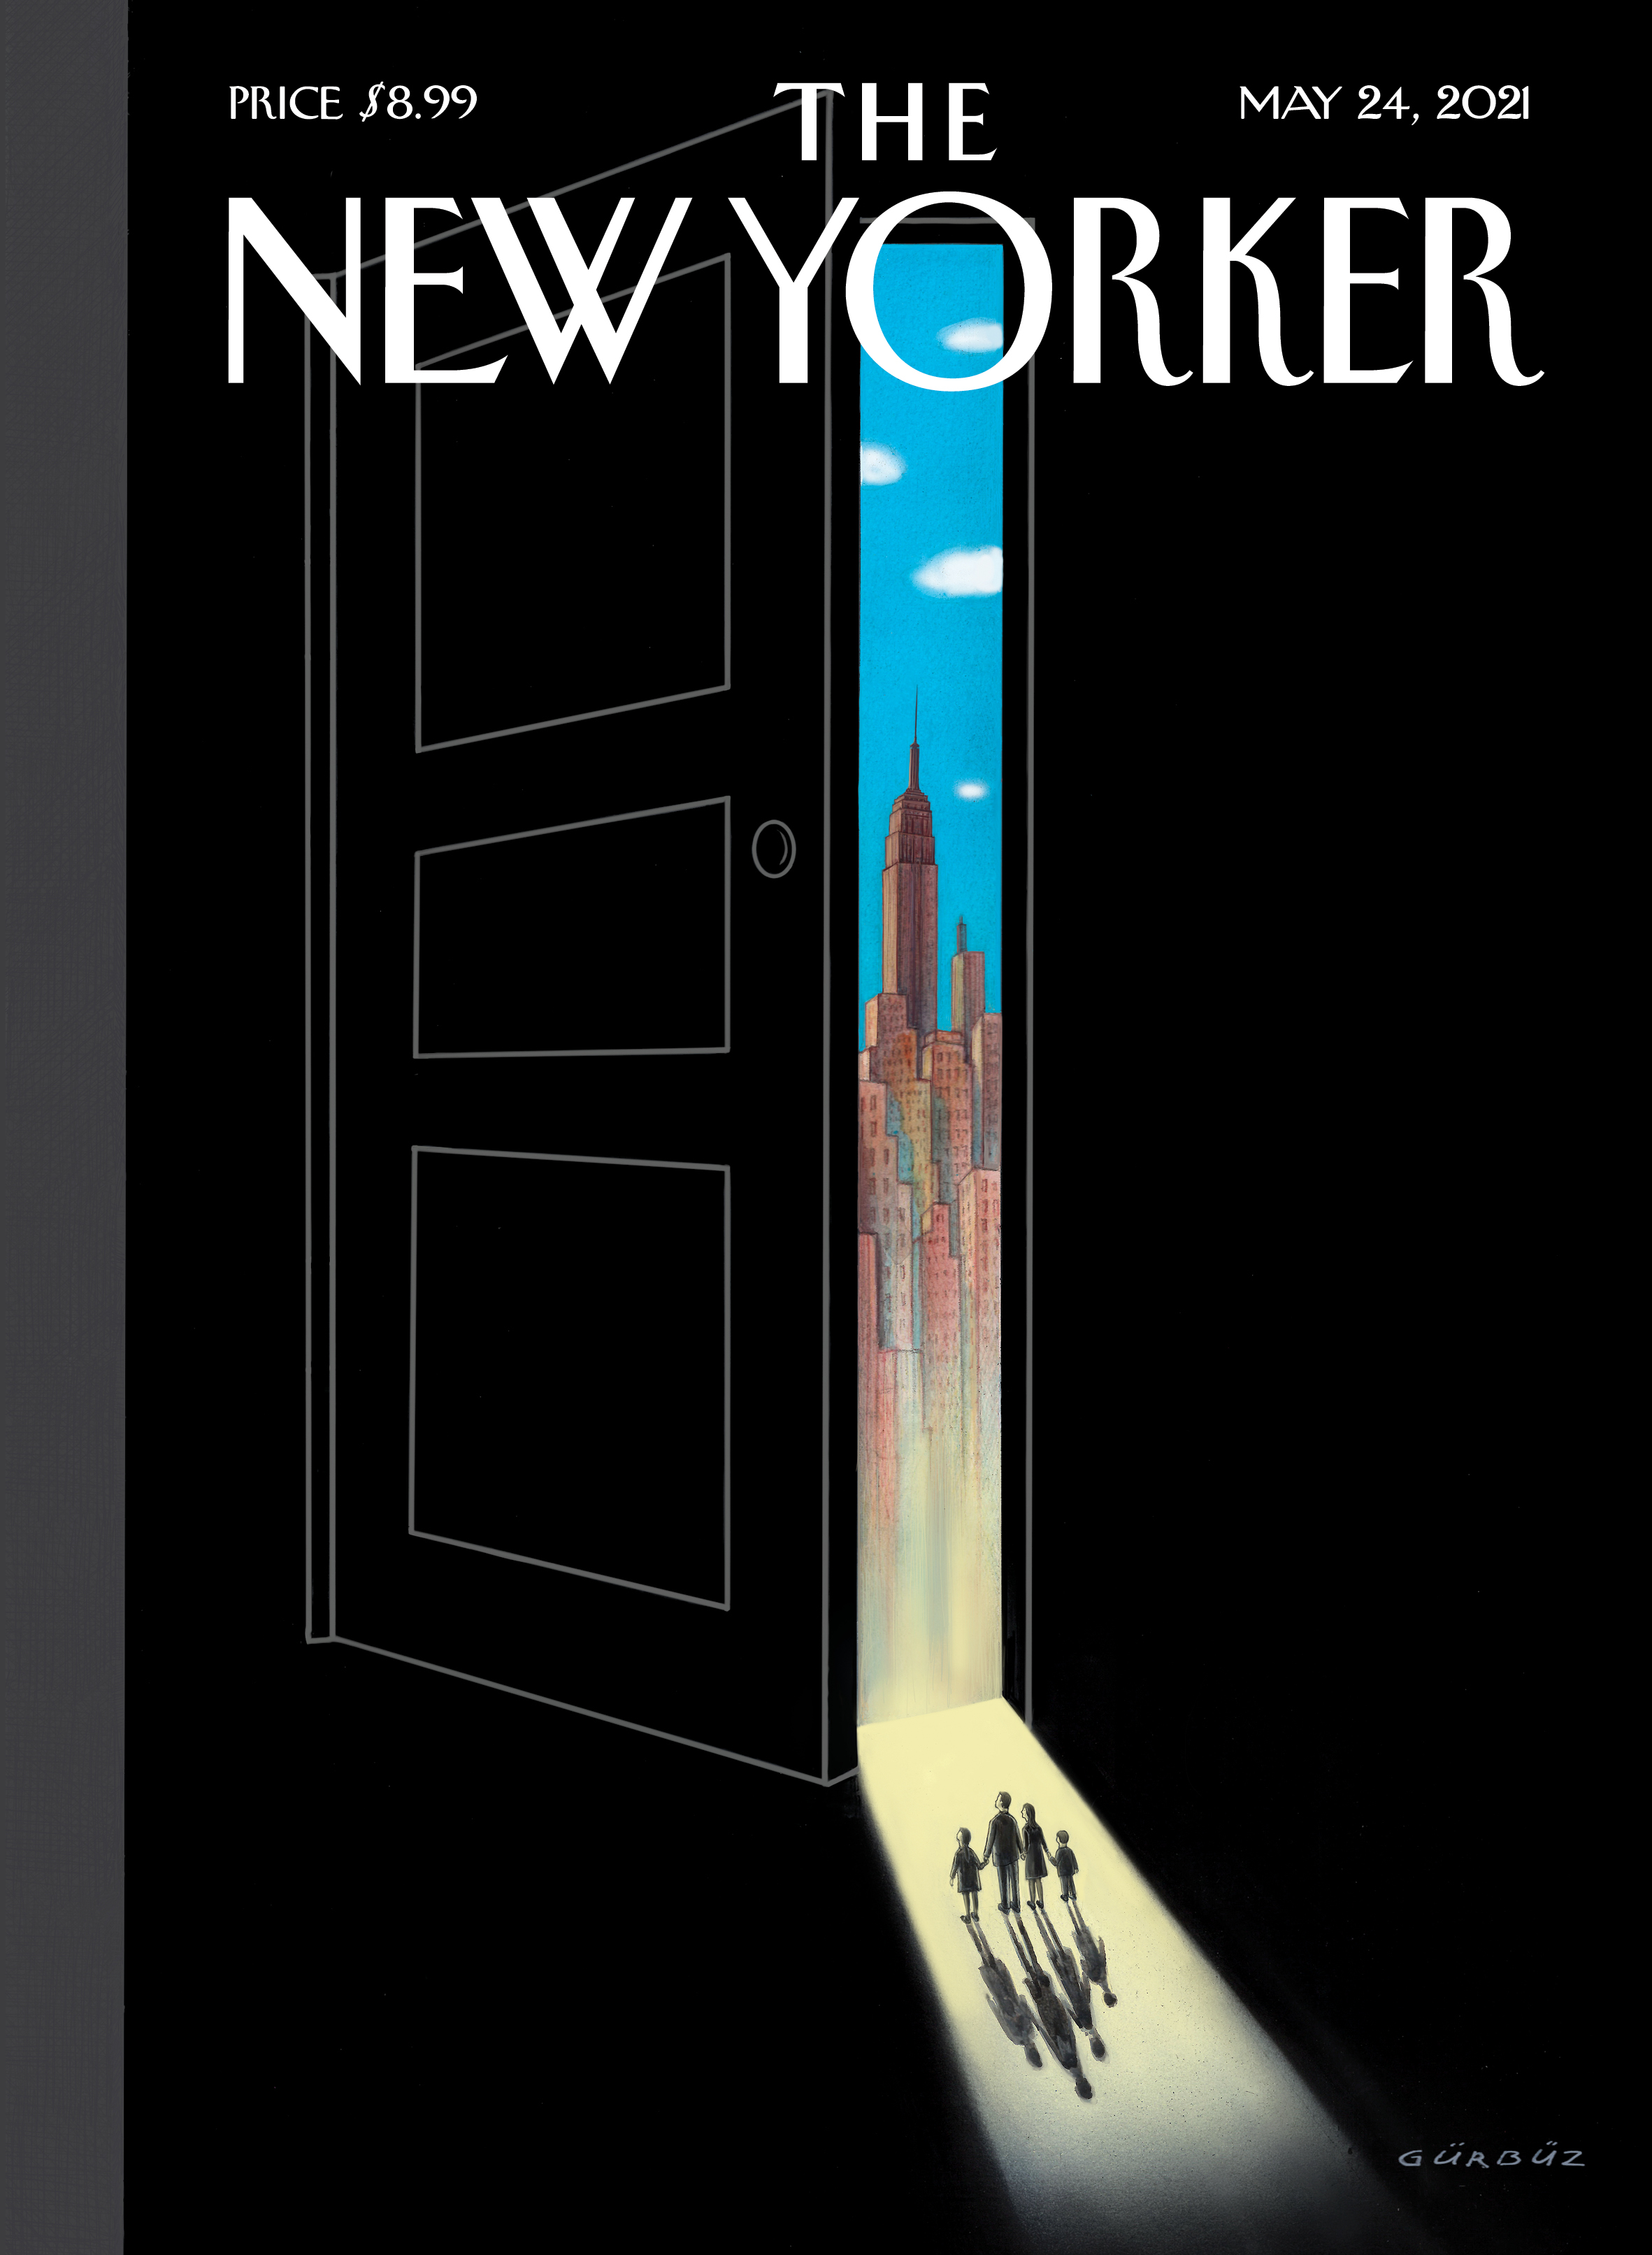 The New Yorker - "Venturing Out," May 24, 2021